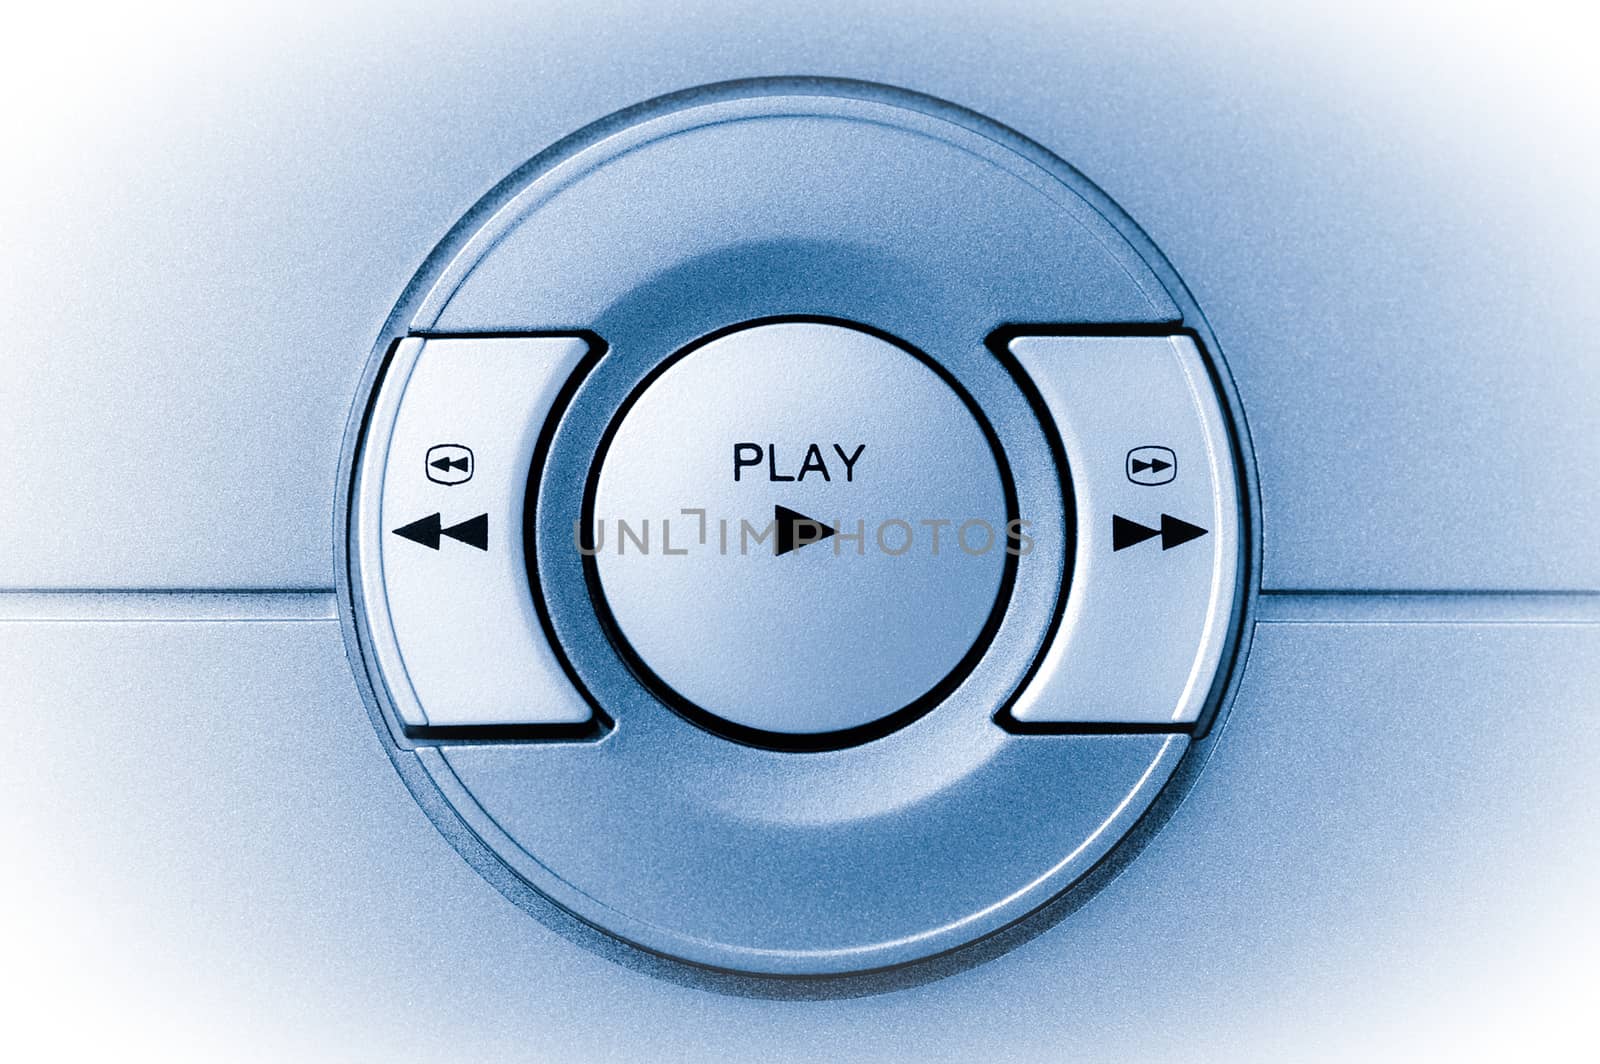 play and rewind buttons on an electronic device